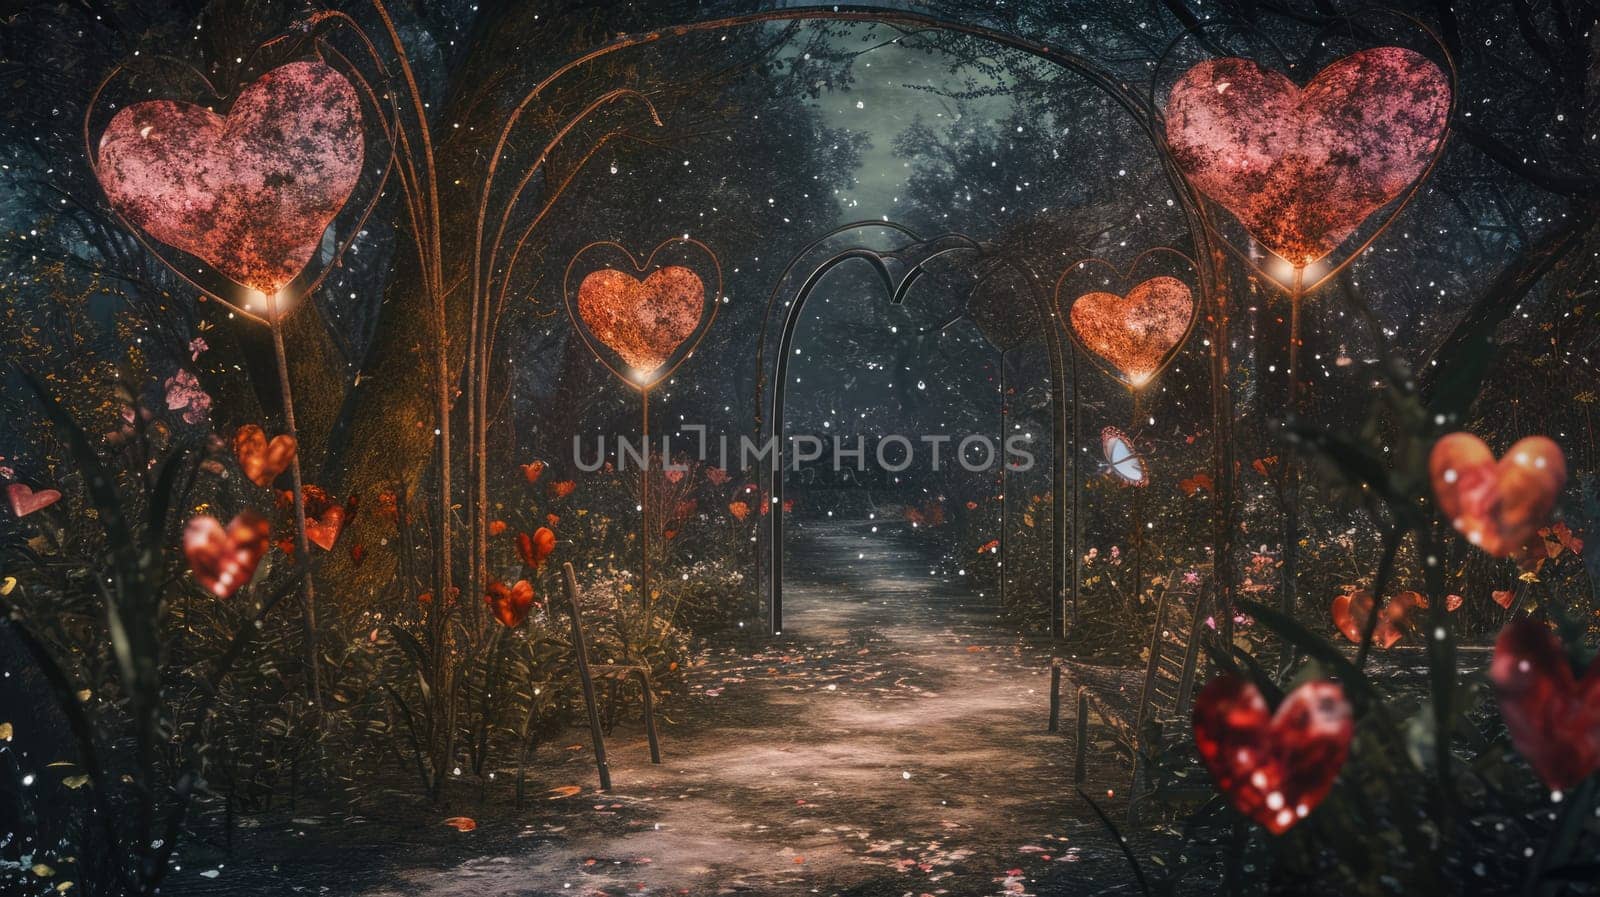 enchanted love forest in the valentines day pragma